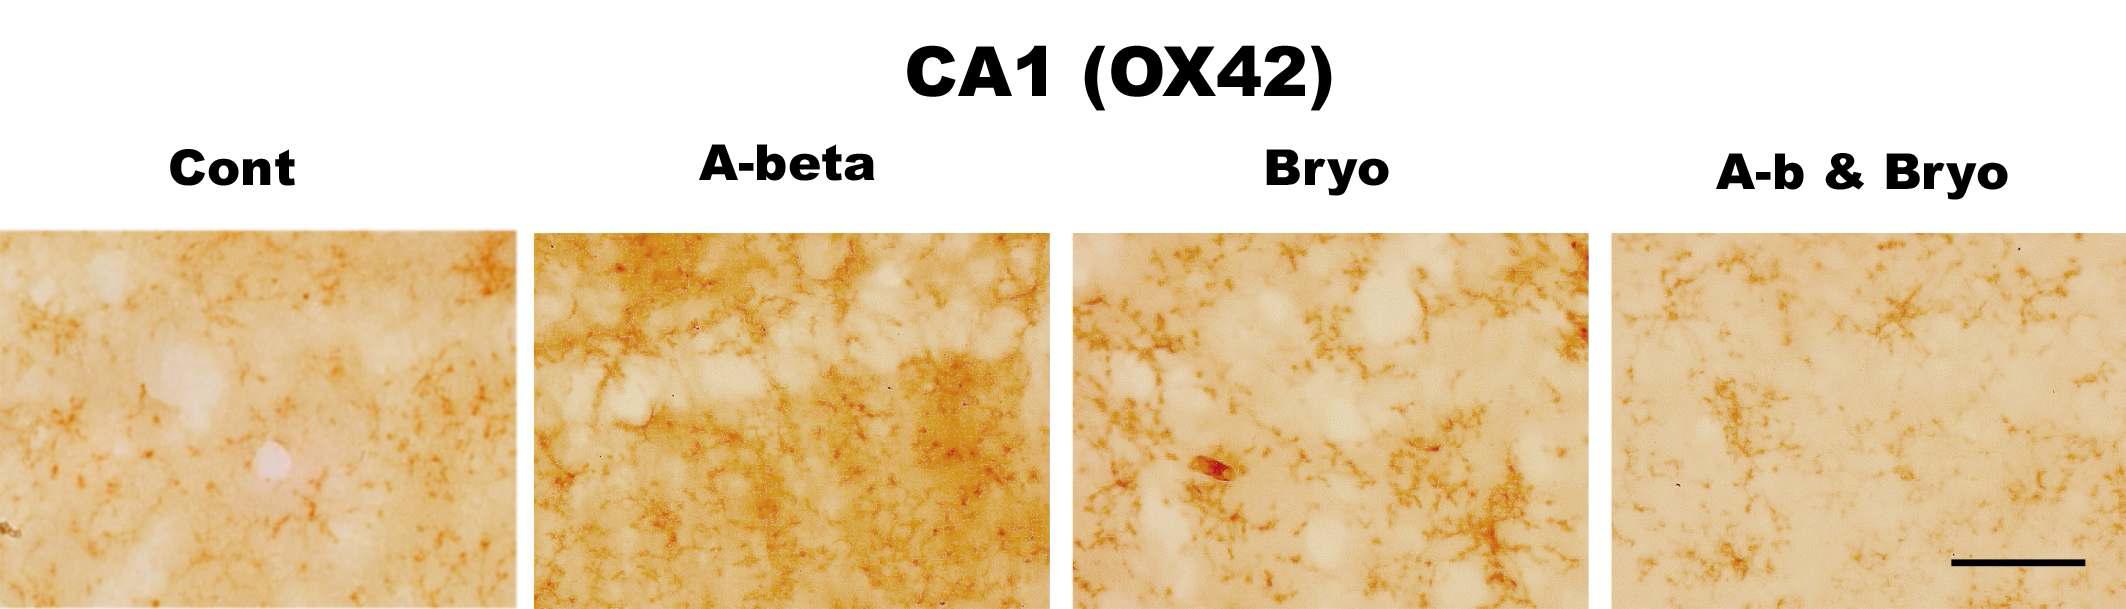 Effects of Bryostatin-1 on glial cell activation in CA1 hippocampus in rat. Bryostatin-1 significantly suppresses a microglia activation in CA1 of rat infused with amyloid beta. Intracerebro-ventricular infusion of Aβ and Bryostatin-1 was for four weeks using a micro-osmotic pump. Immuno- histochemistry (anti-CD11b) (scale bar, 50μm)(40Χ magnification)